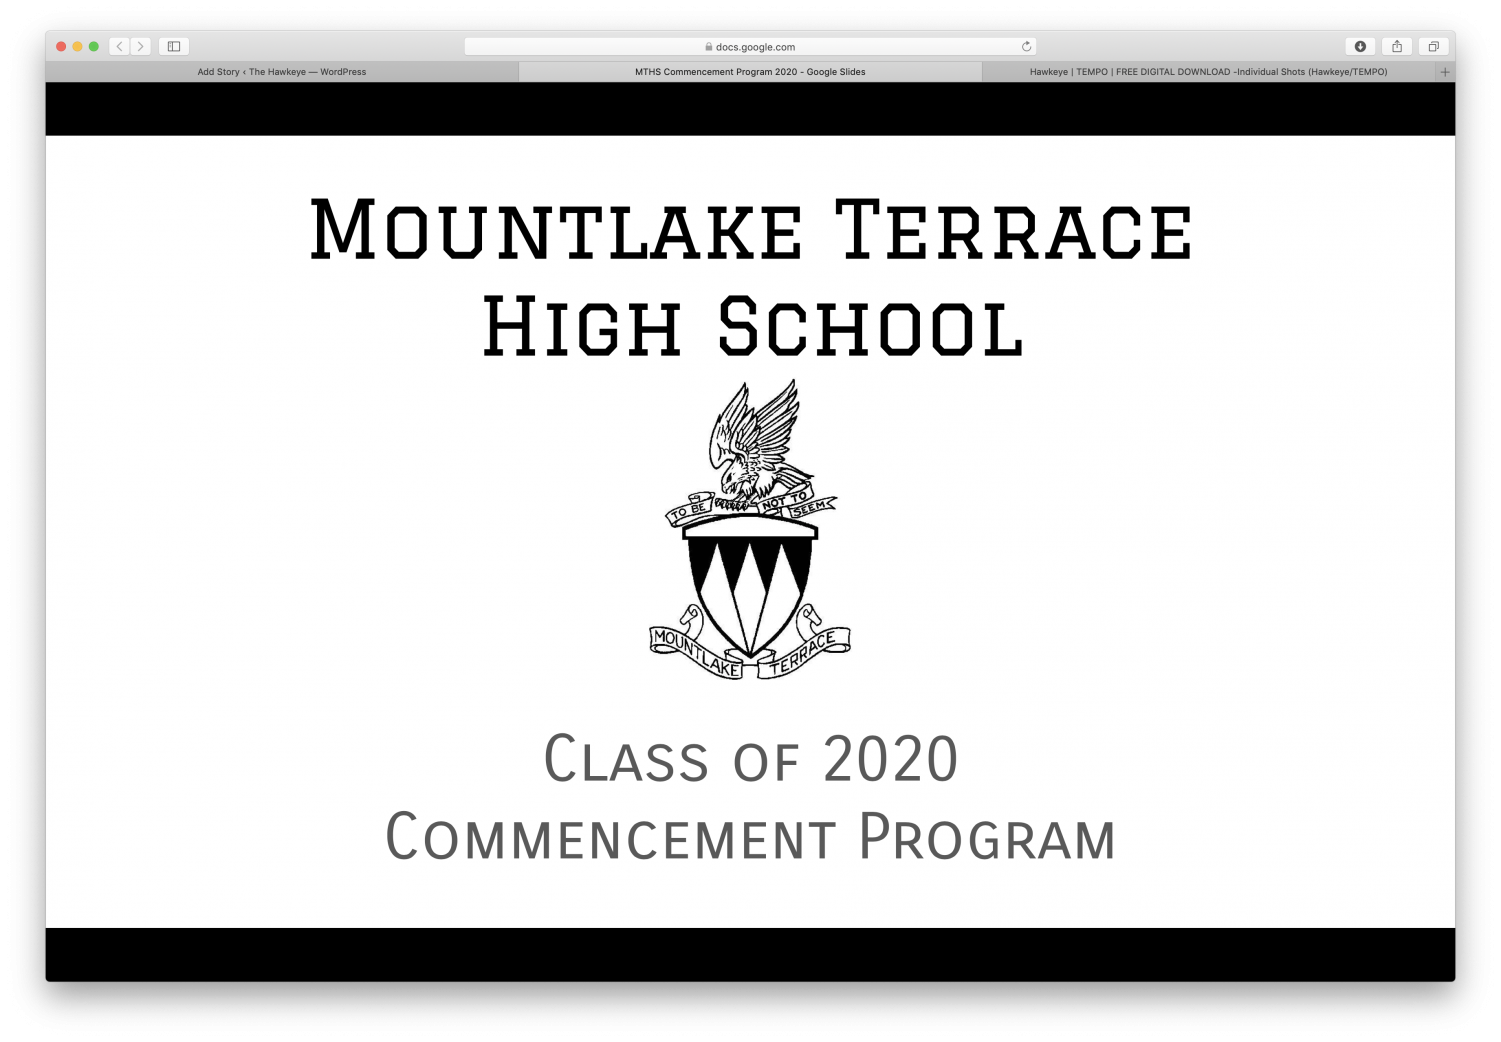 Your Class of 2020 Commencement Program